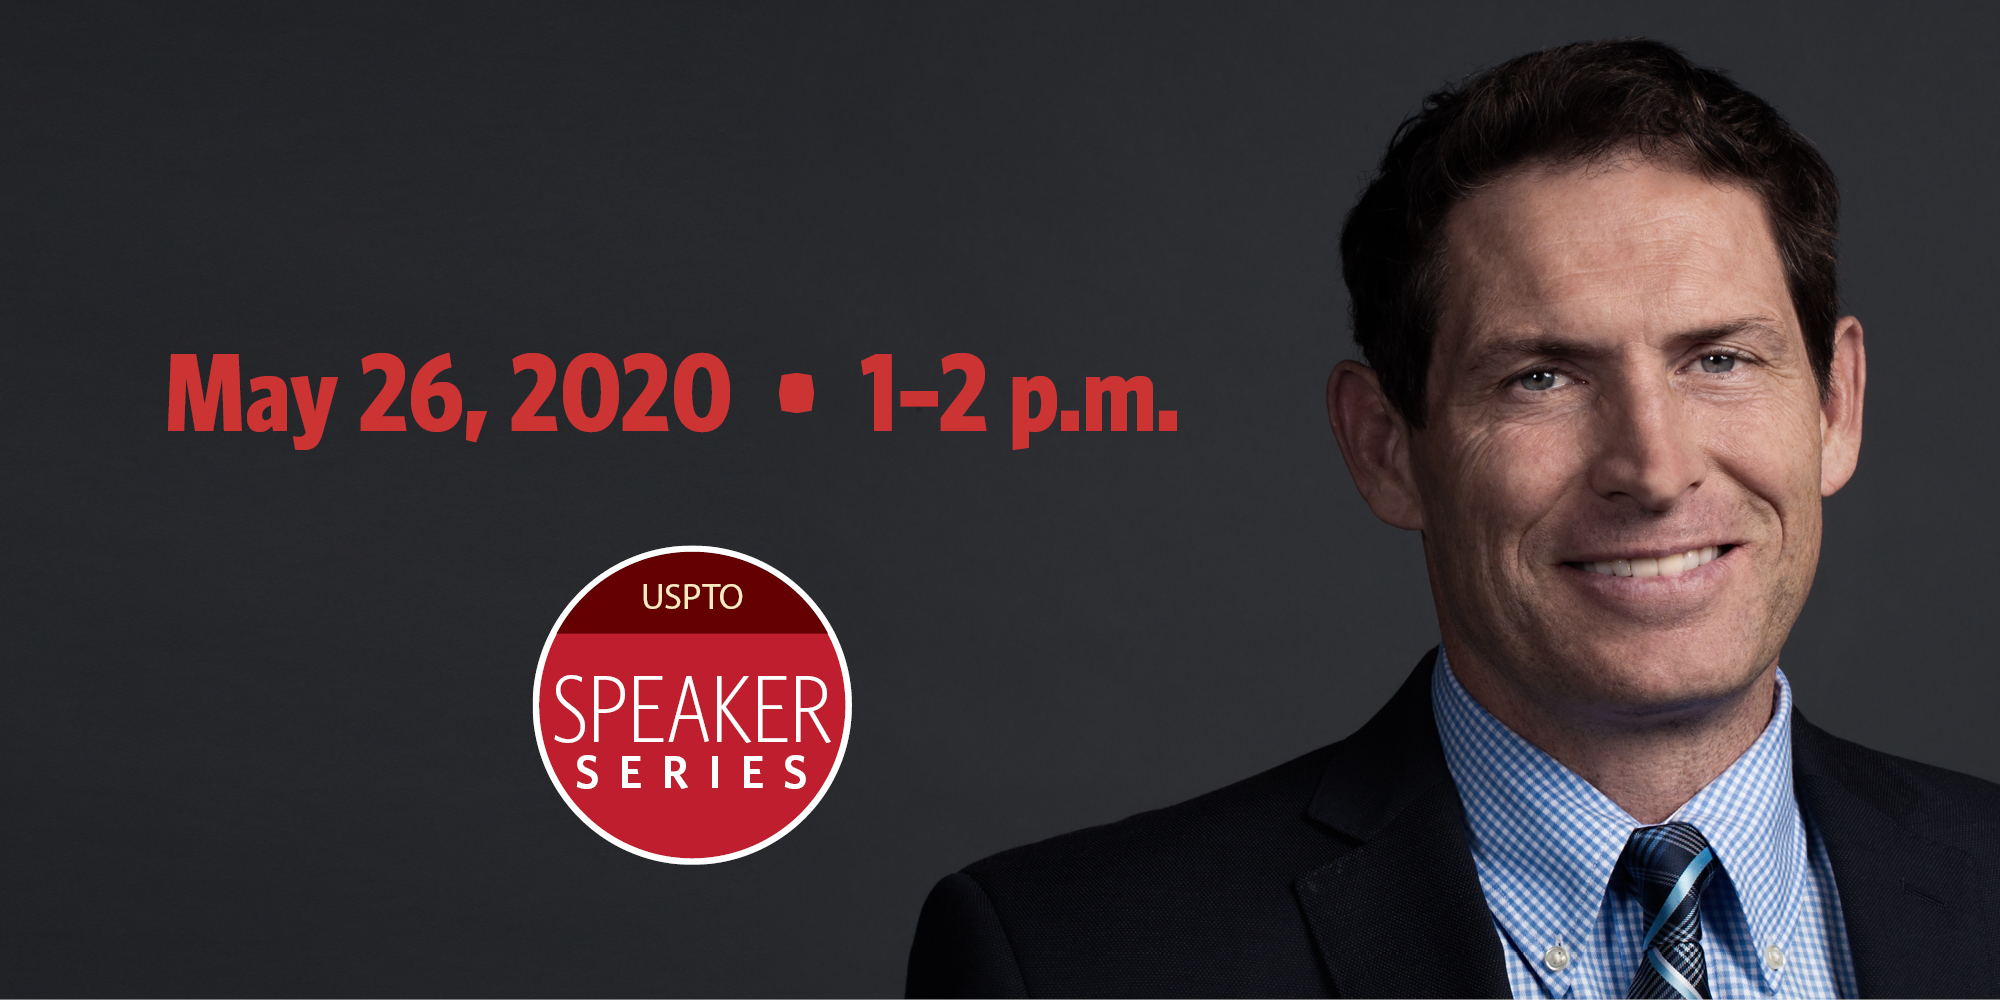 USPTO Speaker series: Steve Young -- May 26, 2020, 1-2 pm